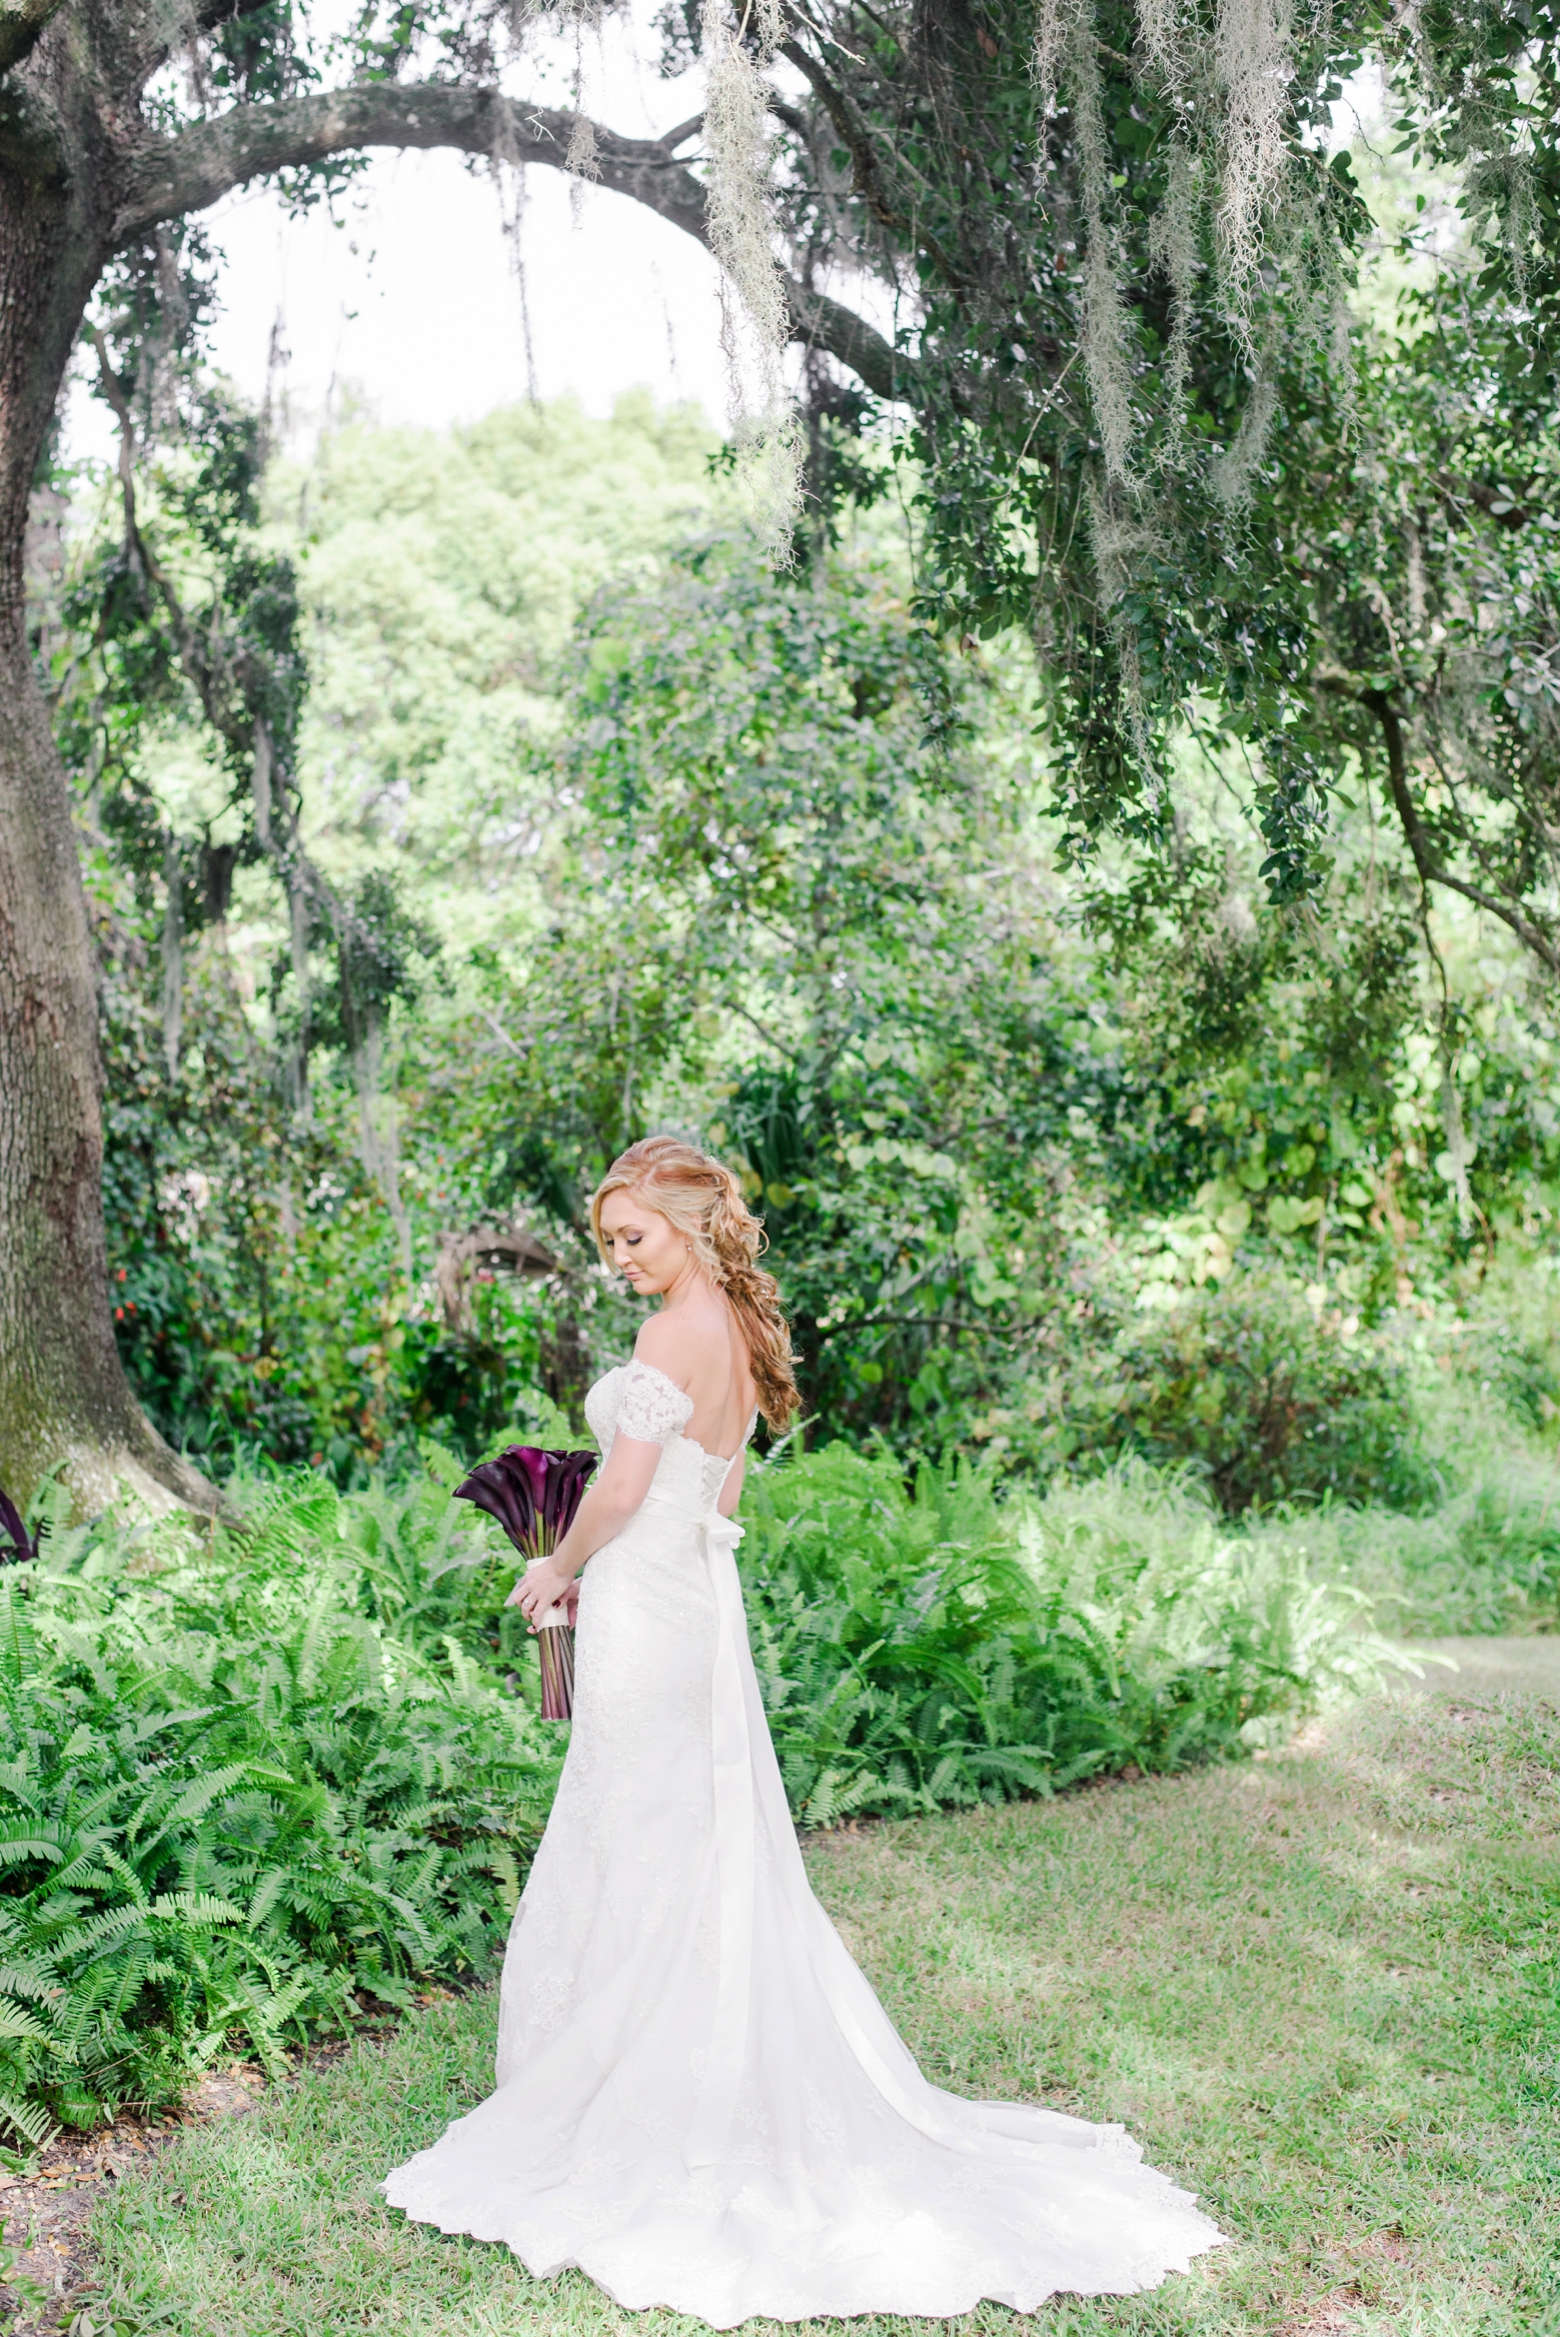 Formal portrait of the Bride holding her floral bouquet under some old Oak trees